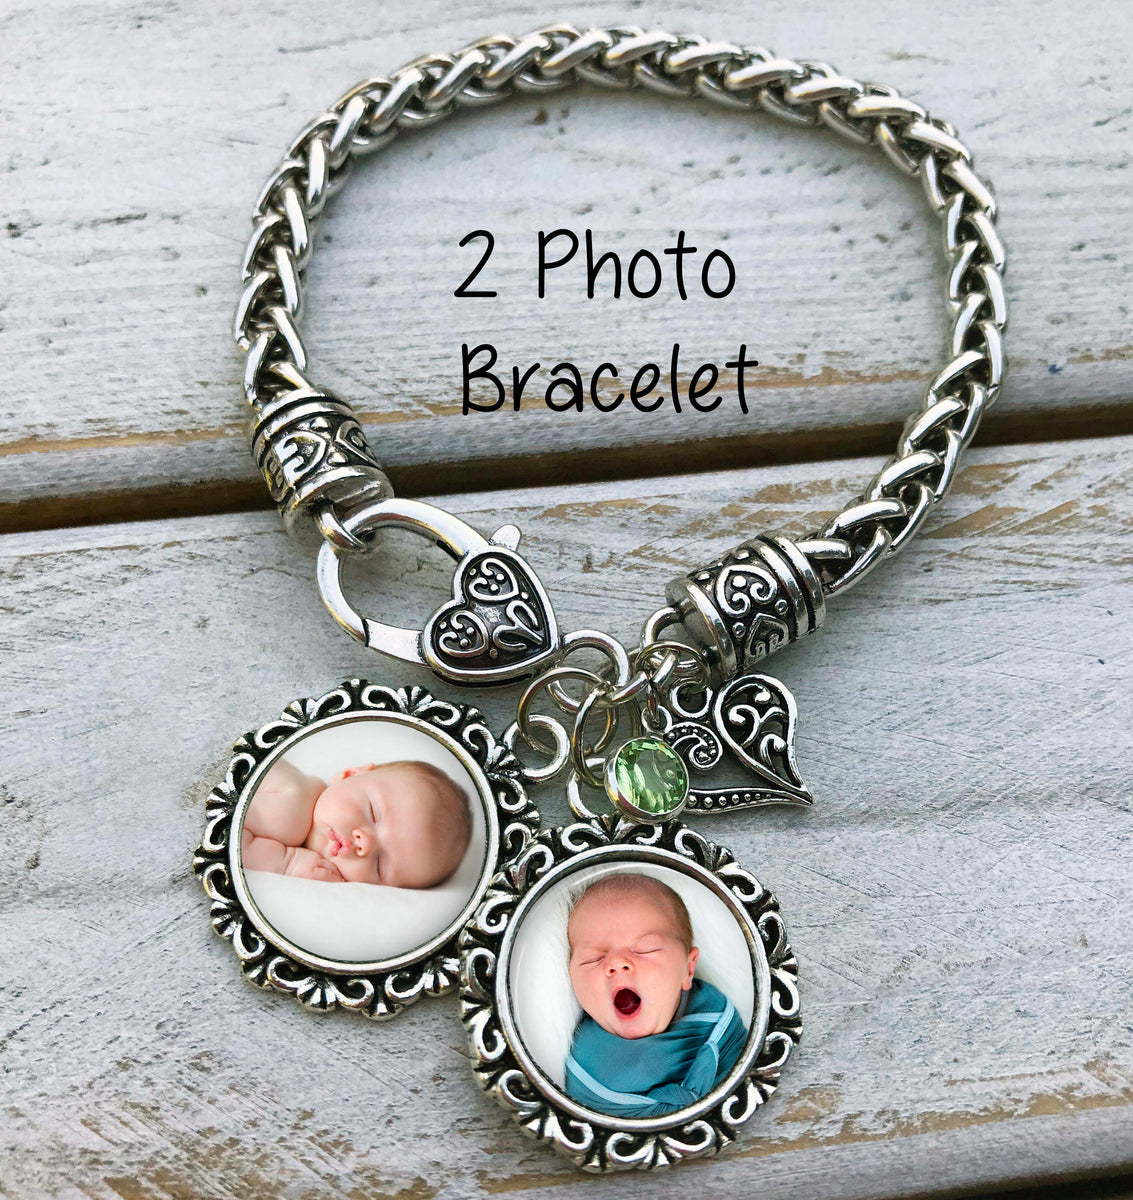 Photo Charm Bracelet with Your Picture Includes 2 Mini Charms on Wheat  Cable Twisted Bracelet with Heart Clasp, Memorial Jewelry